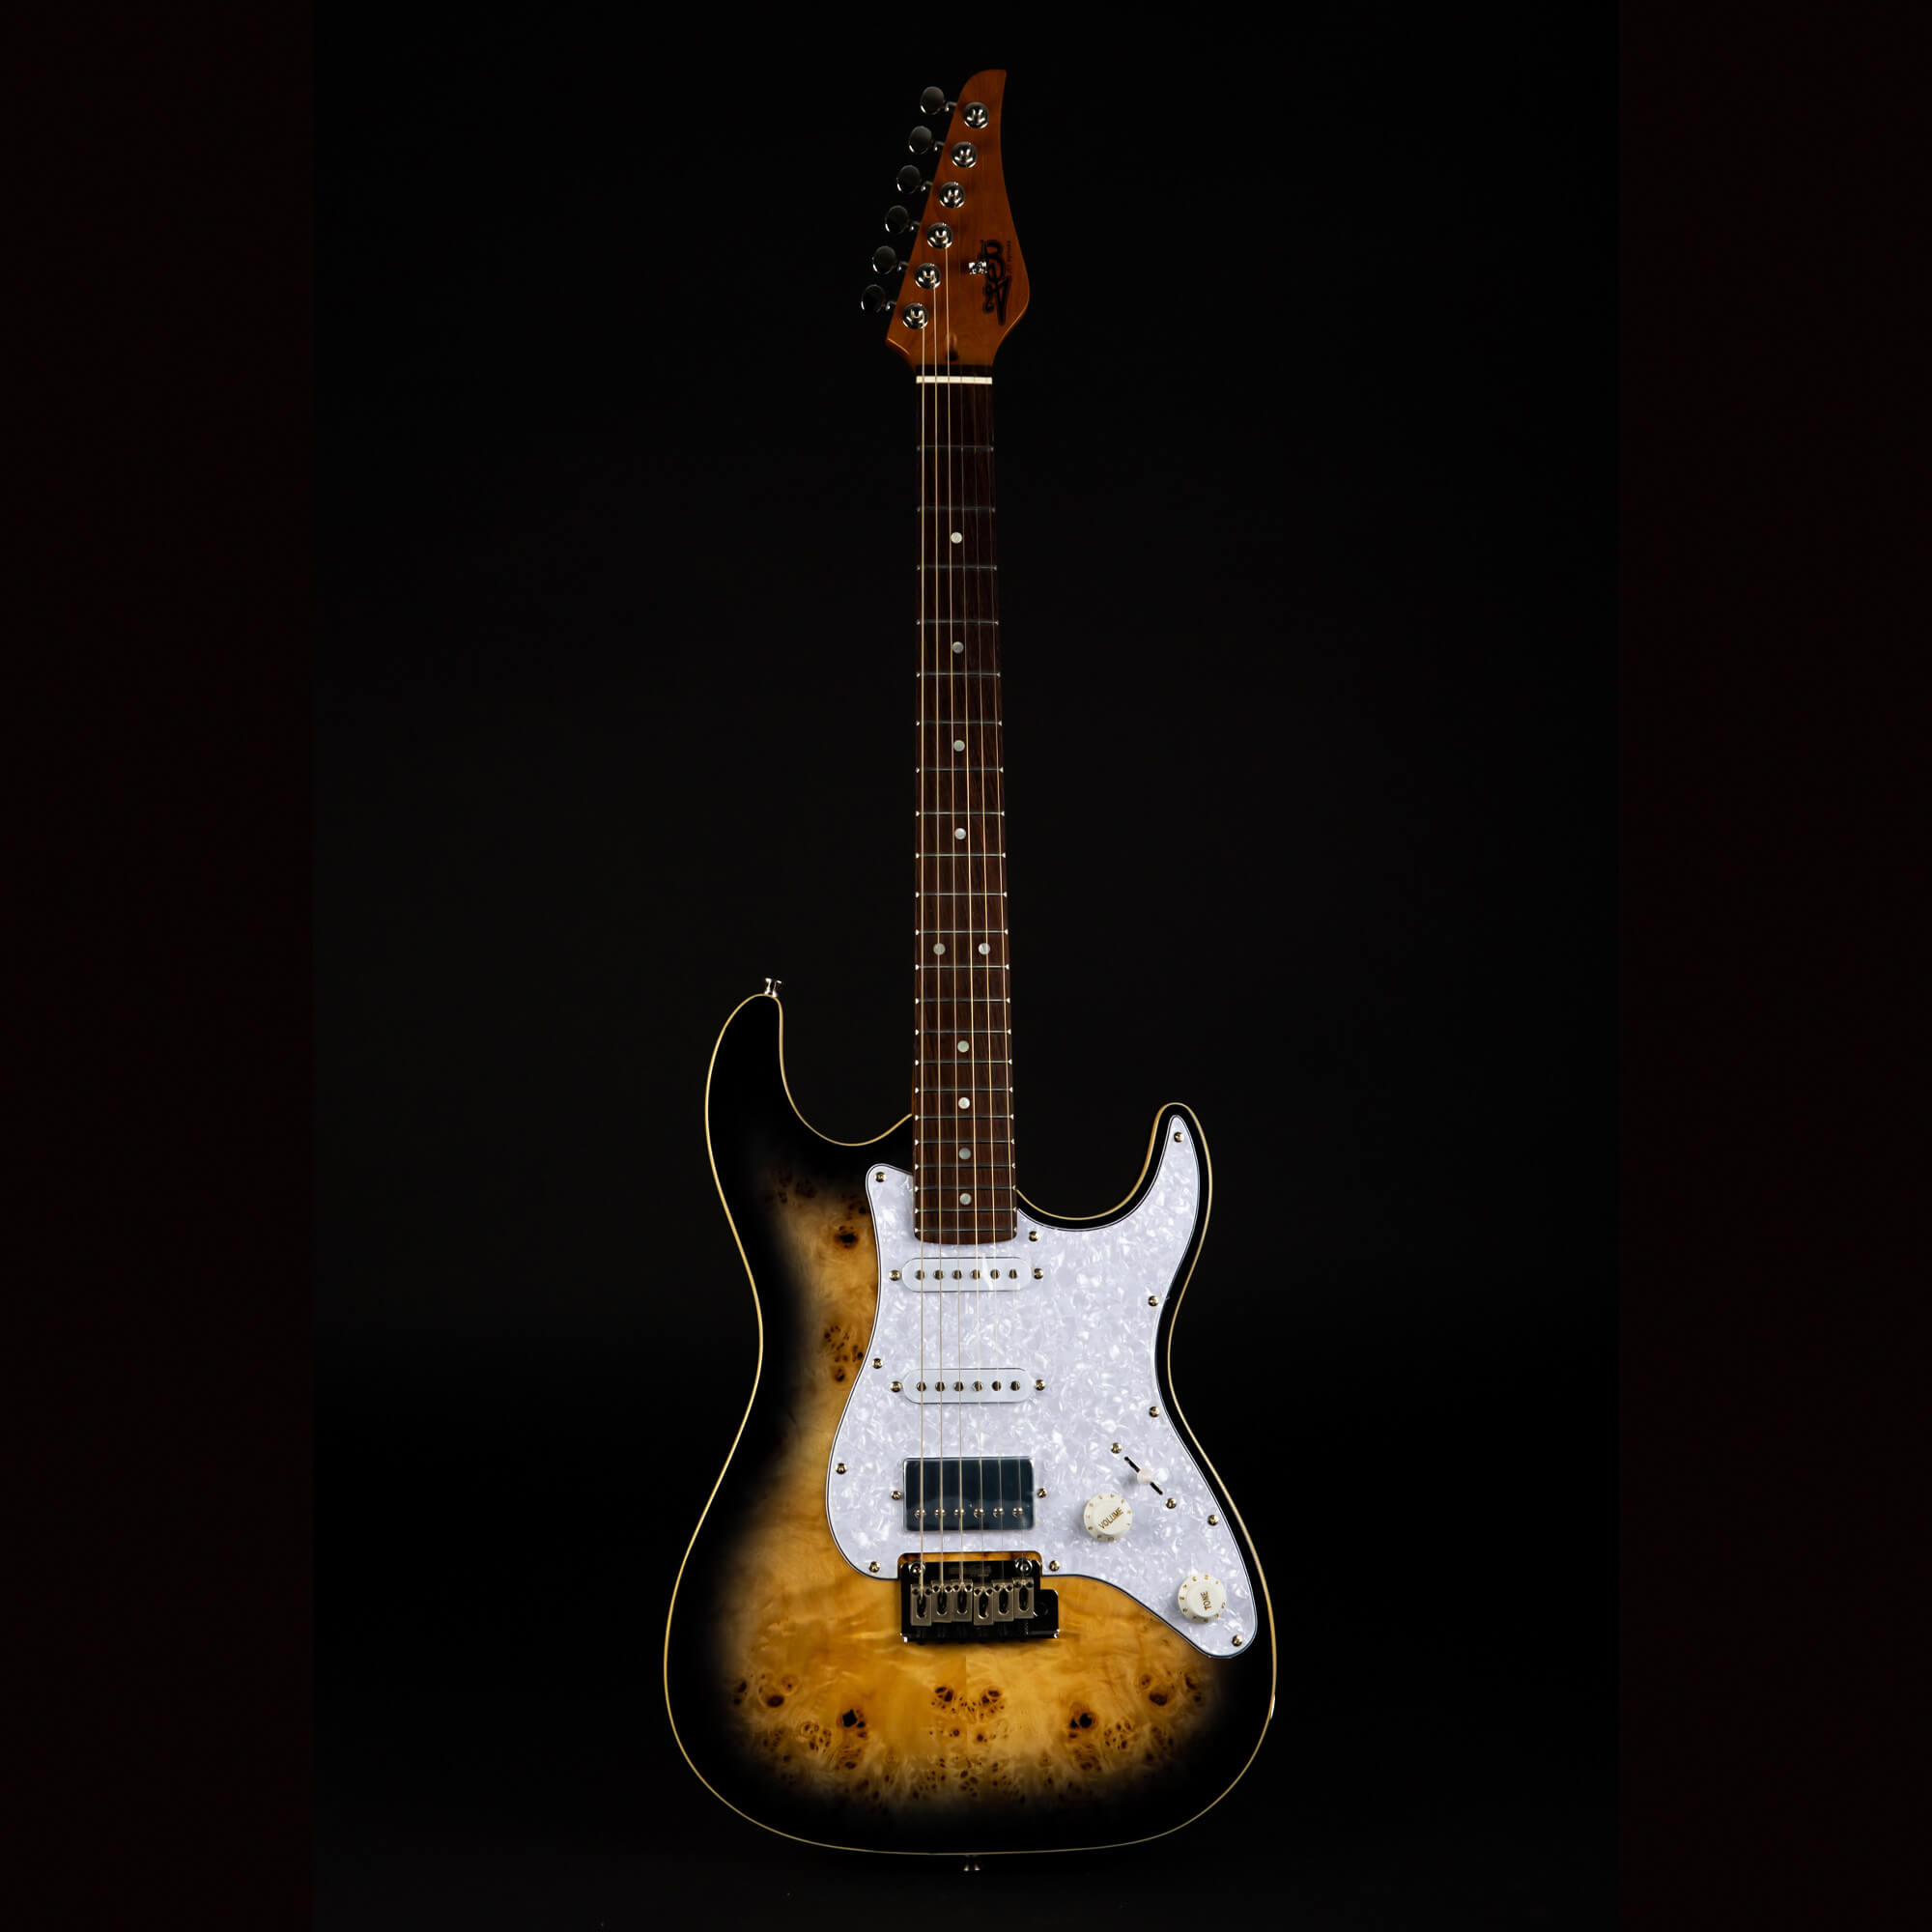 JS450 Electric Guitar - Trans Brown (Spalted Top) : Rosewood Fretboard